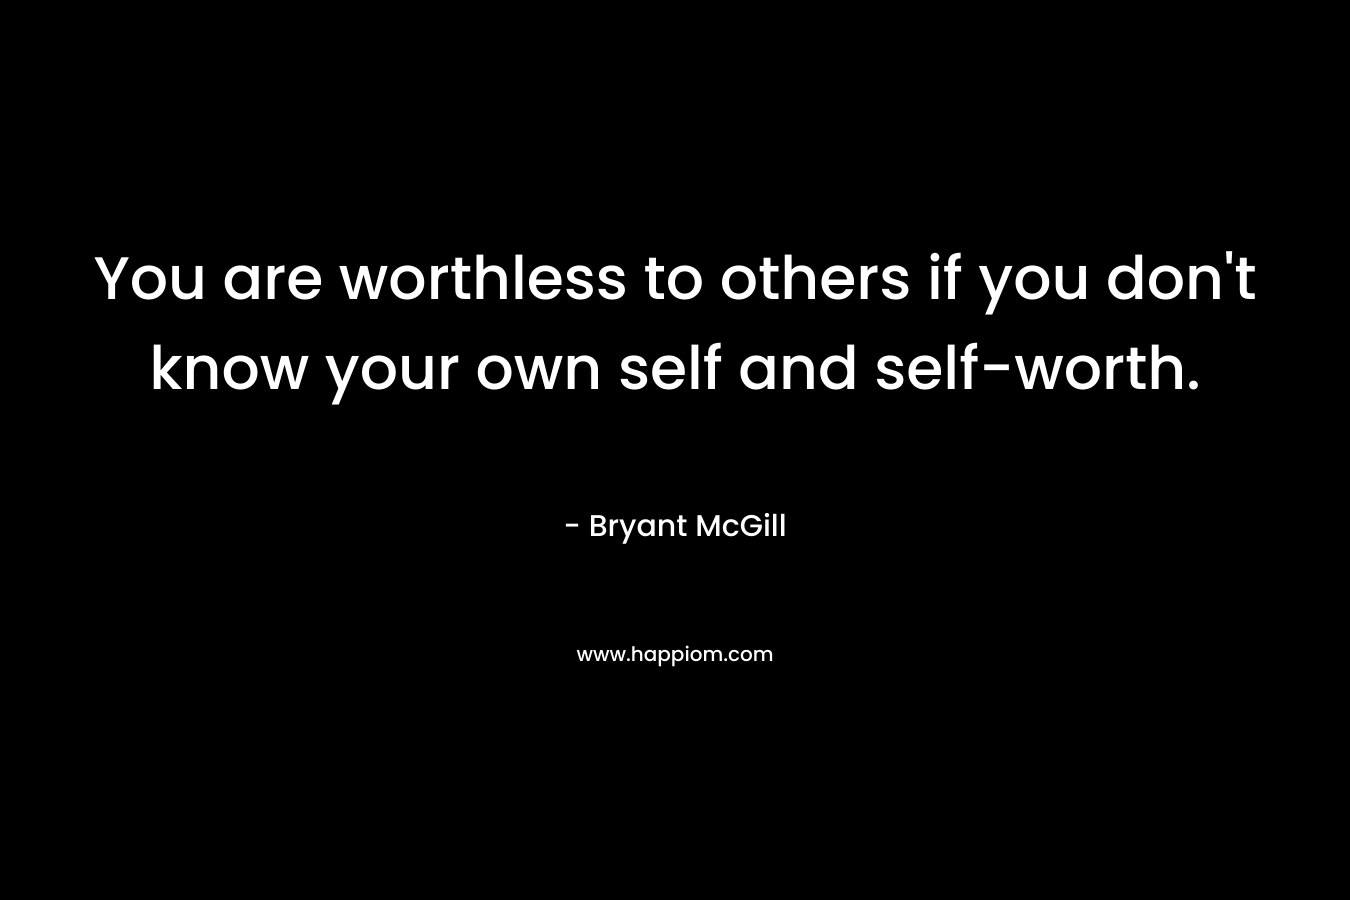 You are worthless to others if you don’t know your own self and self-worth. – Bryant McGill